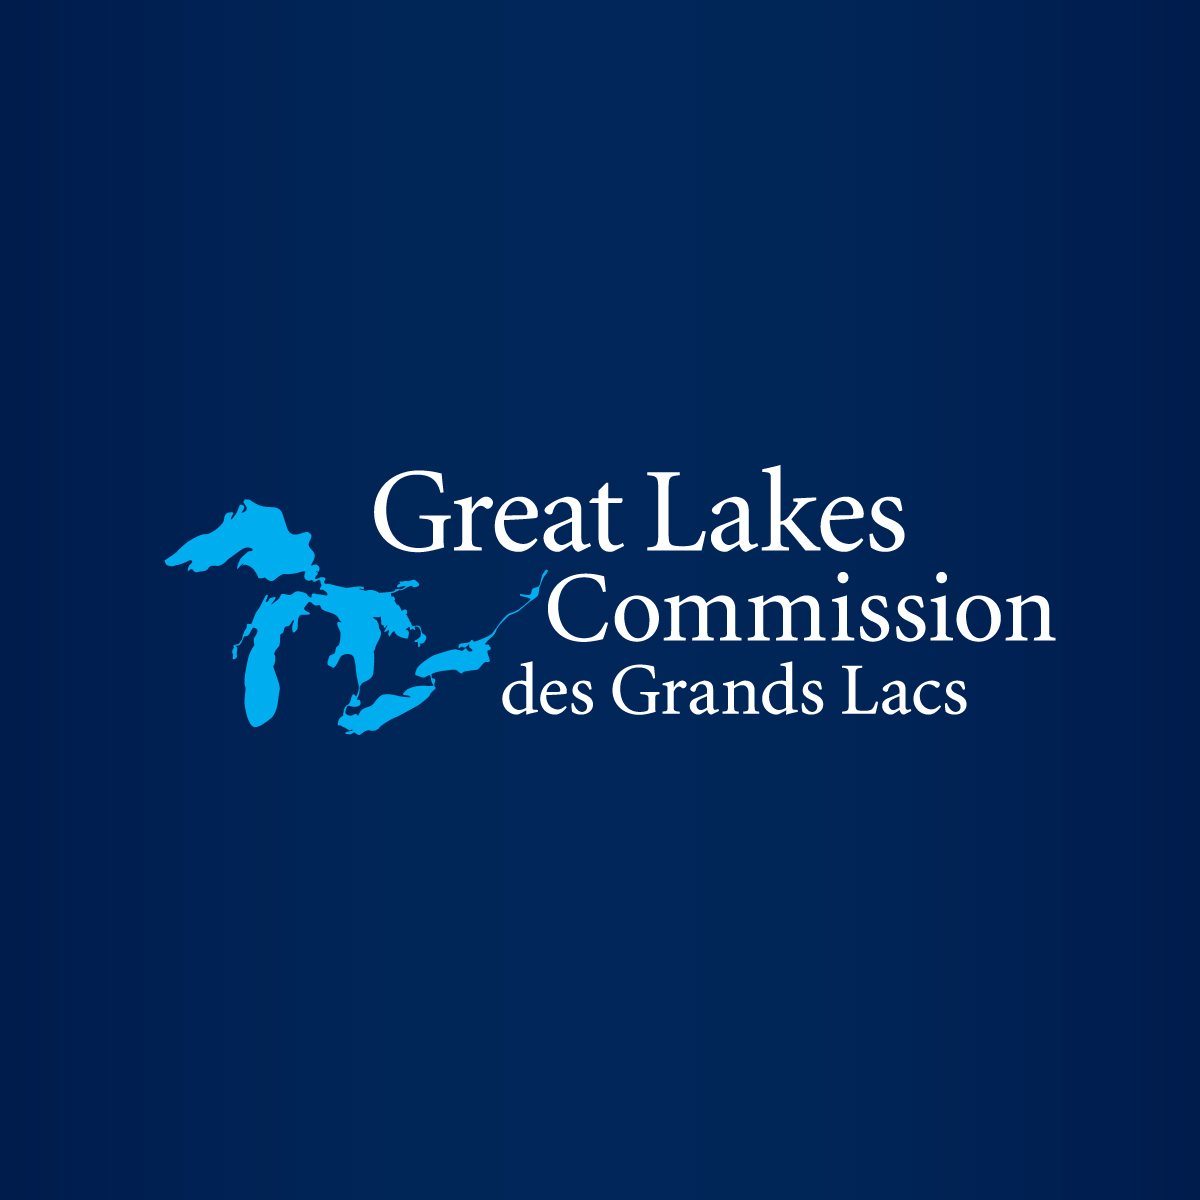 request for proposals great lakes sediment and nutrient reduction program